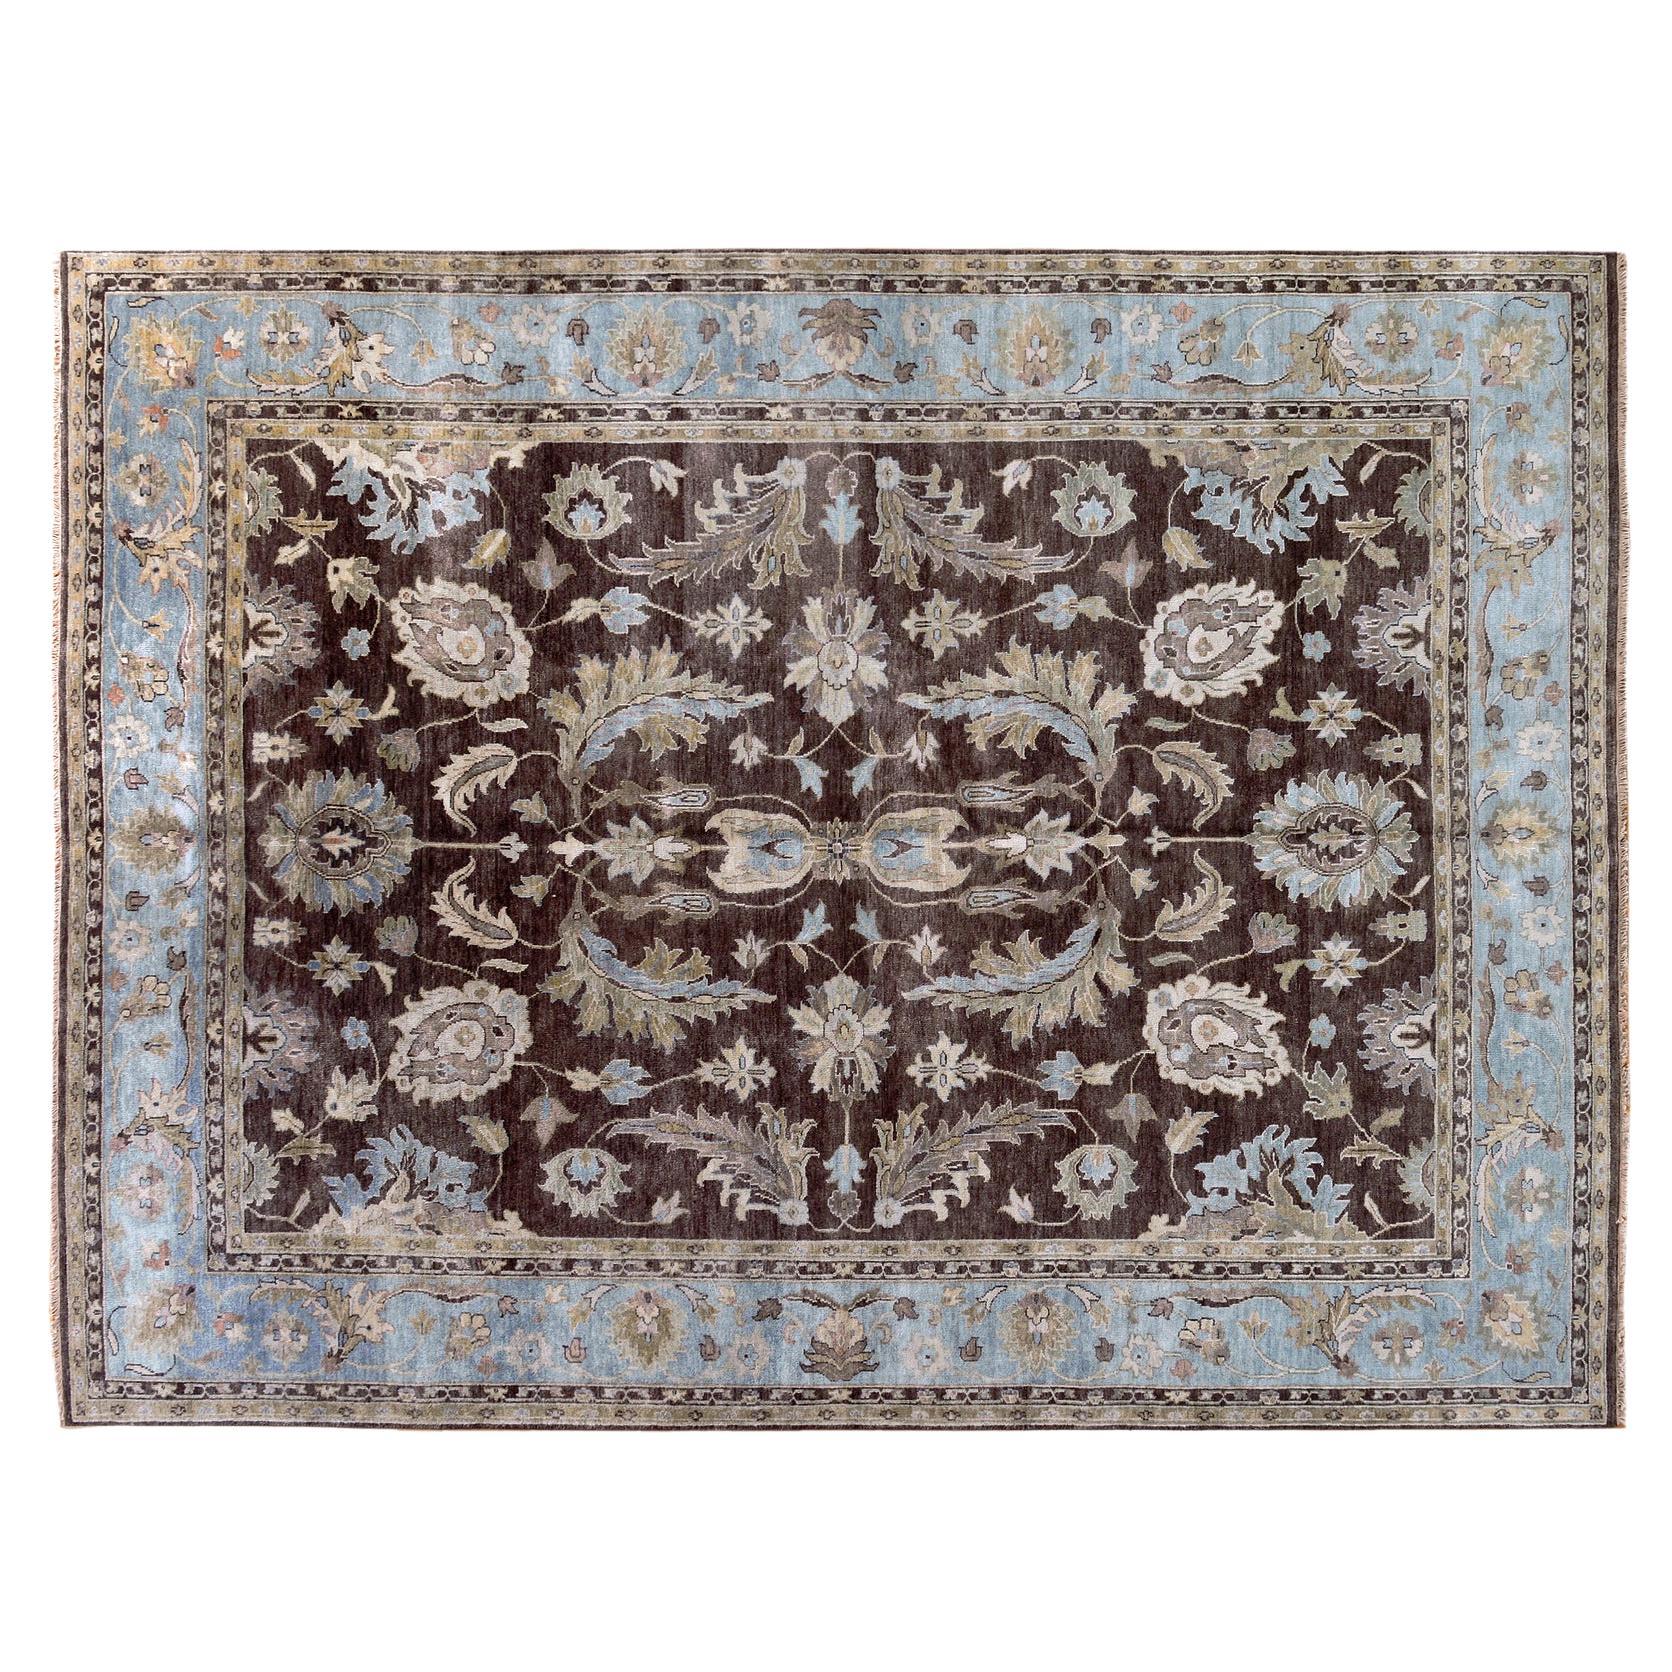 9'x12' Browns and Blues Floral Design Rug For Sale